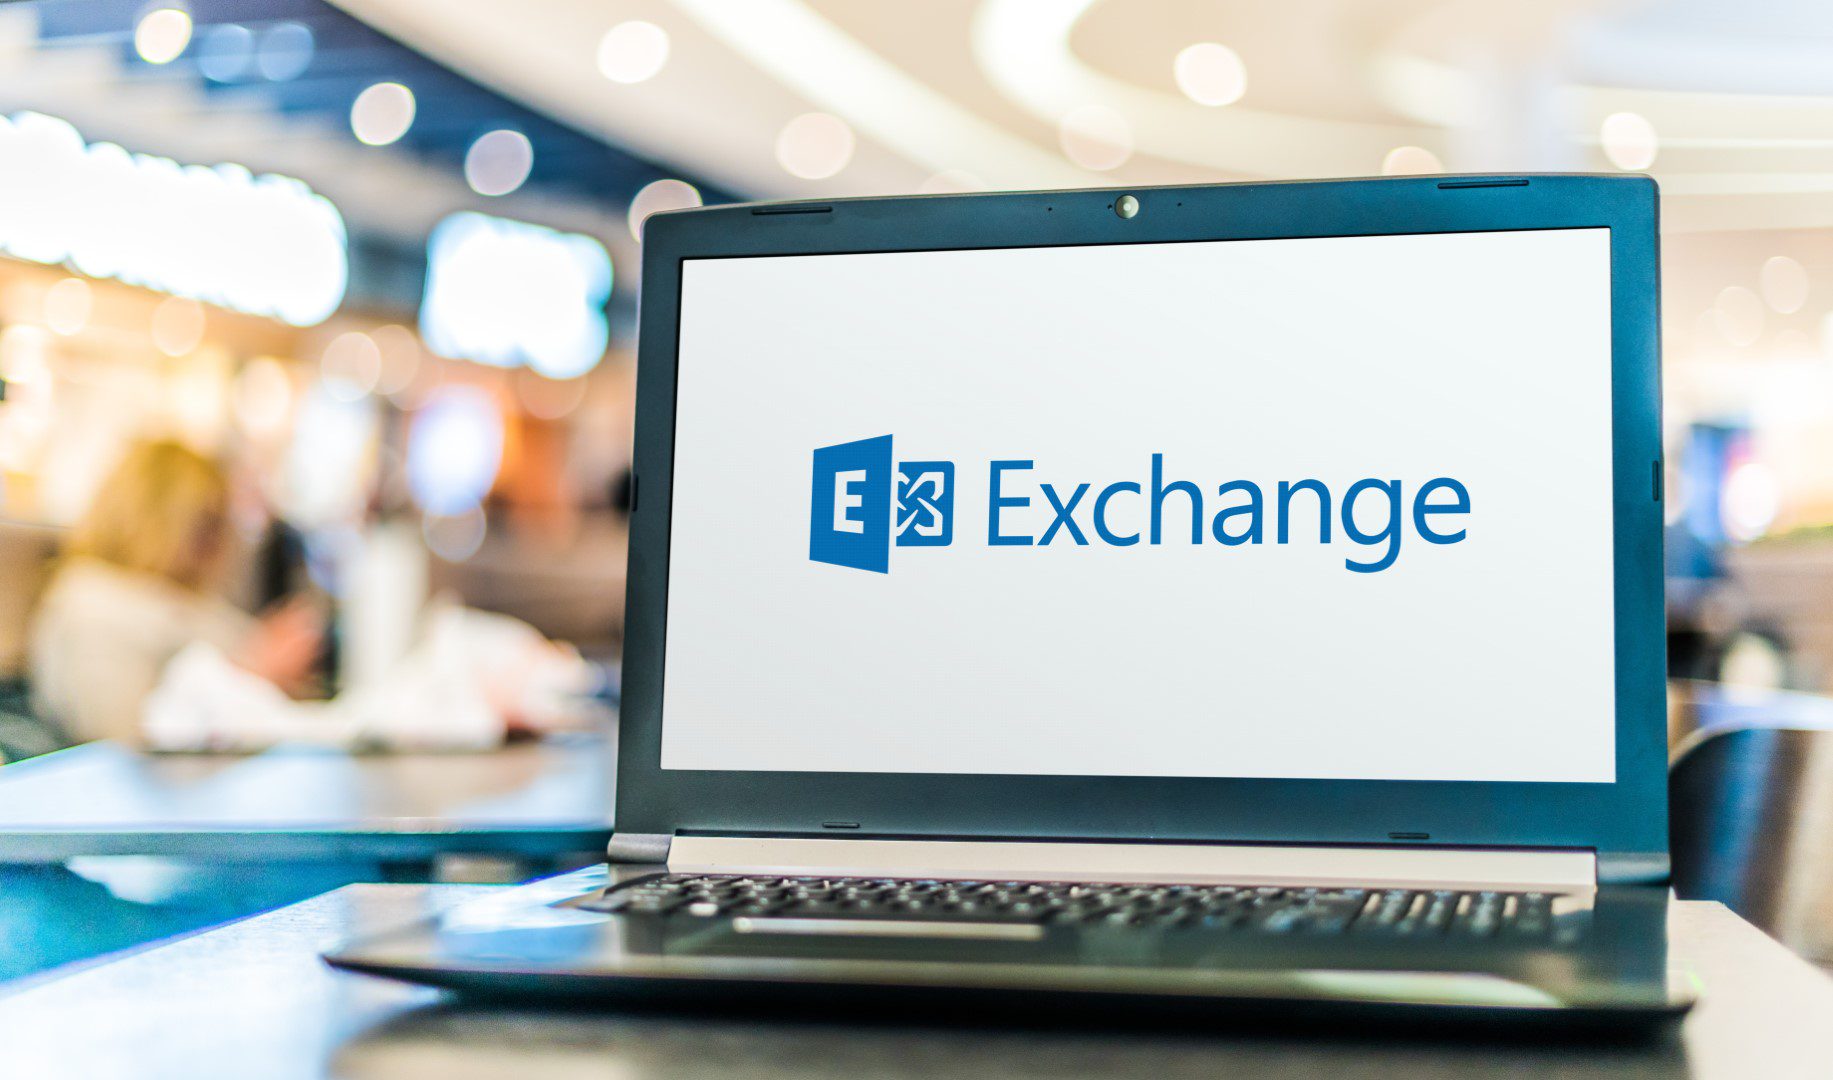 A critical flaw in Microsoft Exchange was exploited to release the patch